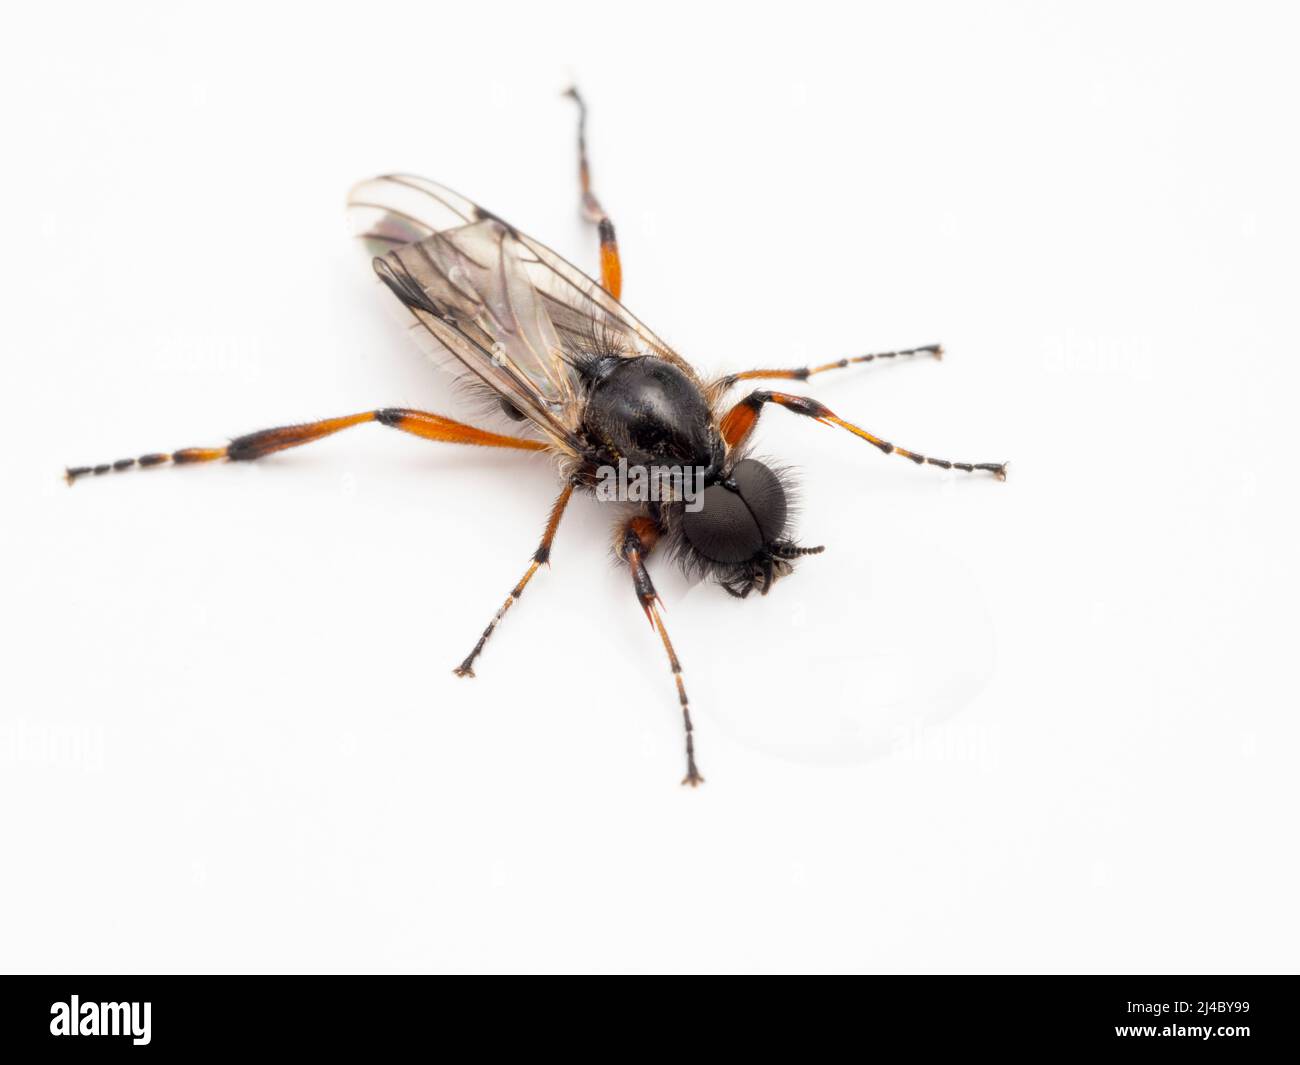 Pretty male March fly (Bibio vestitus) drinking water, from above, isolated Stock Photo